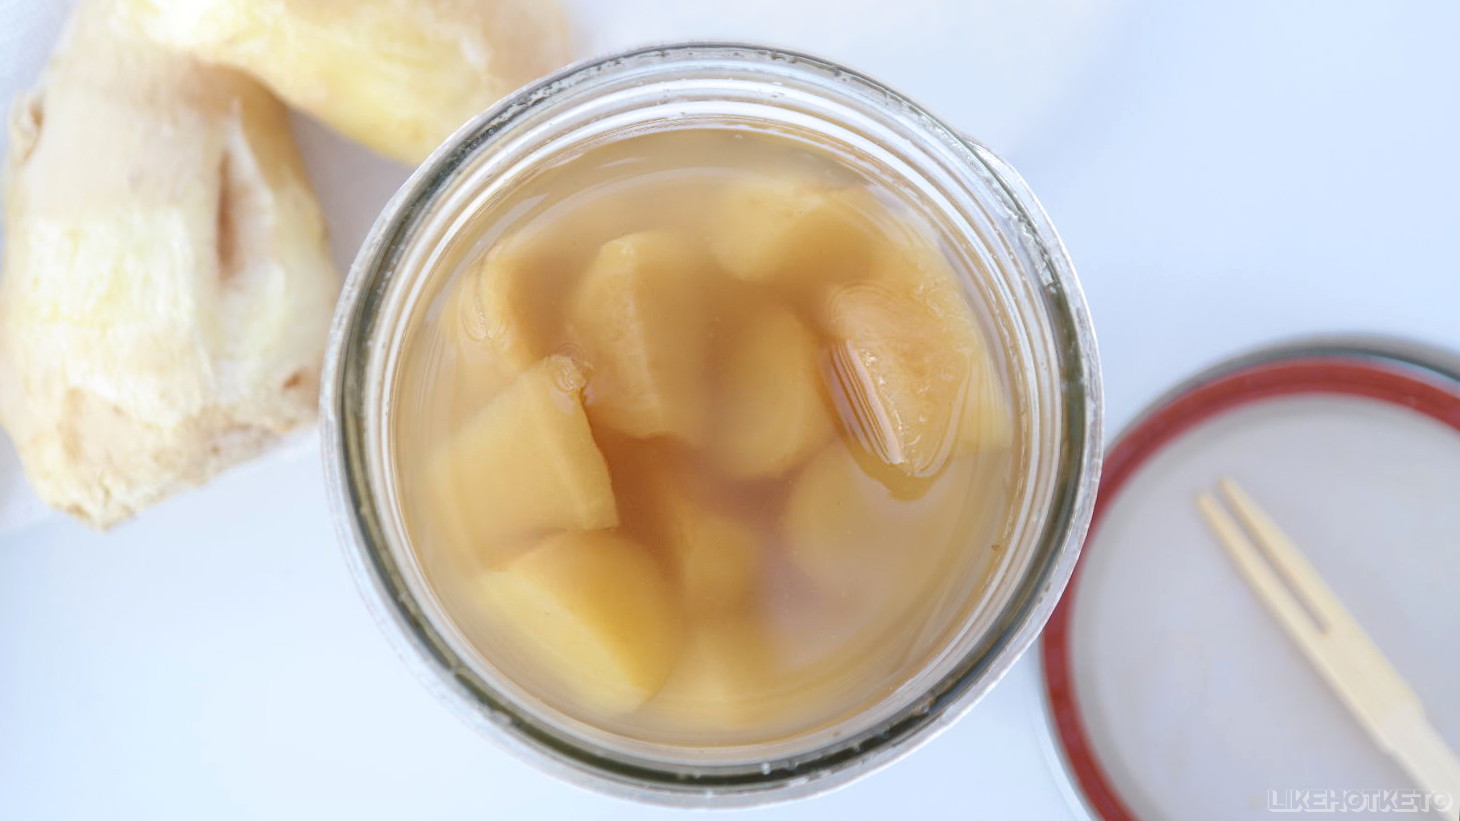 An open glass jar filled with homemade preserved ginger in erythritol syrup.